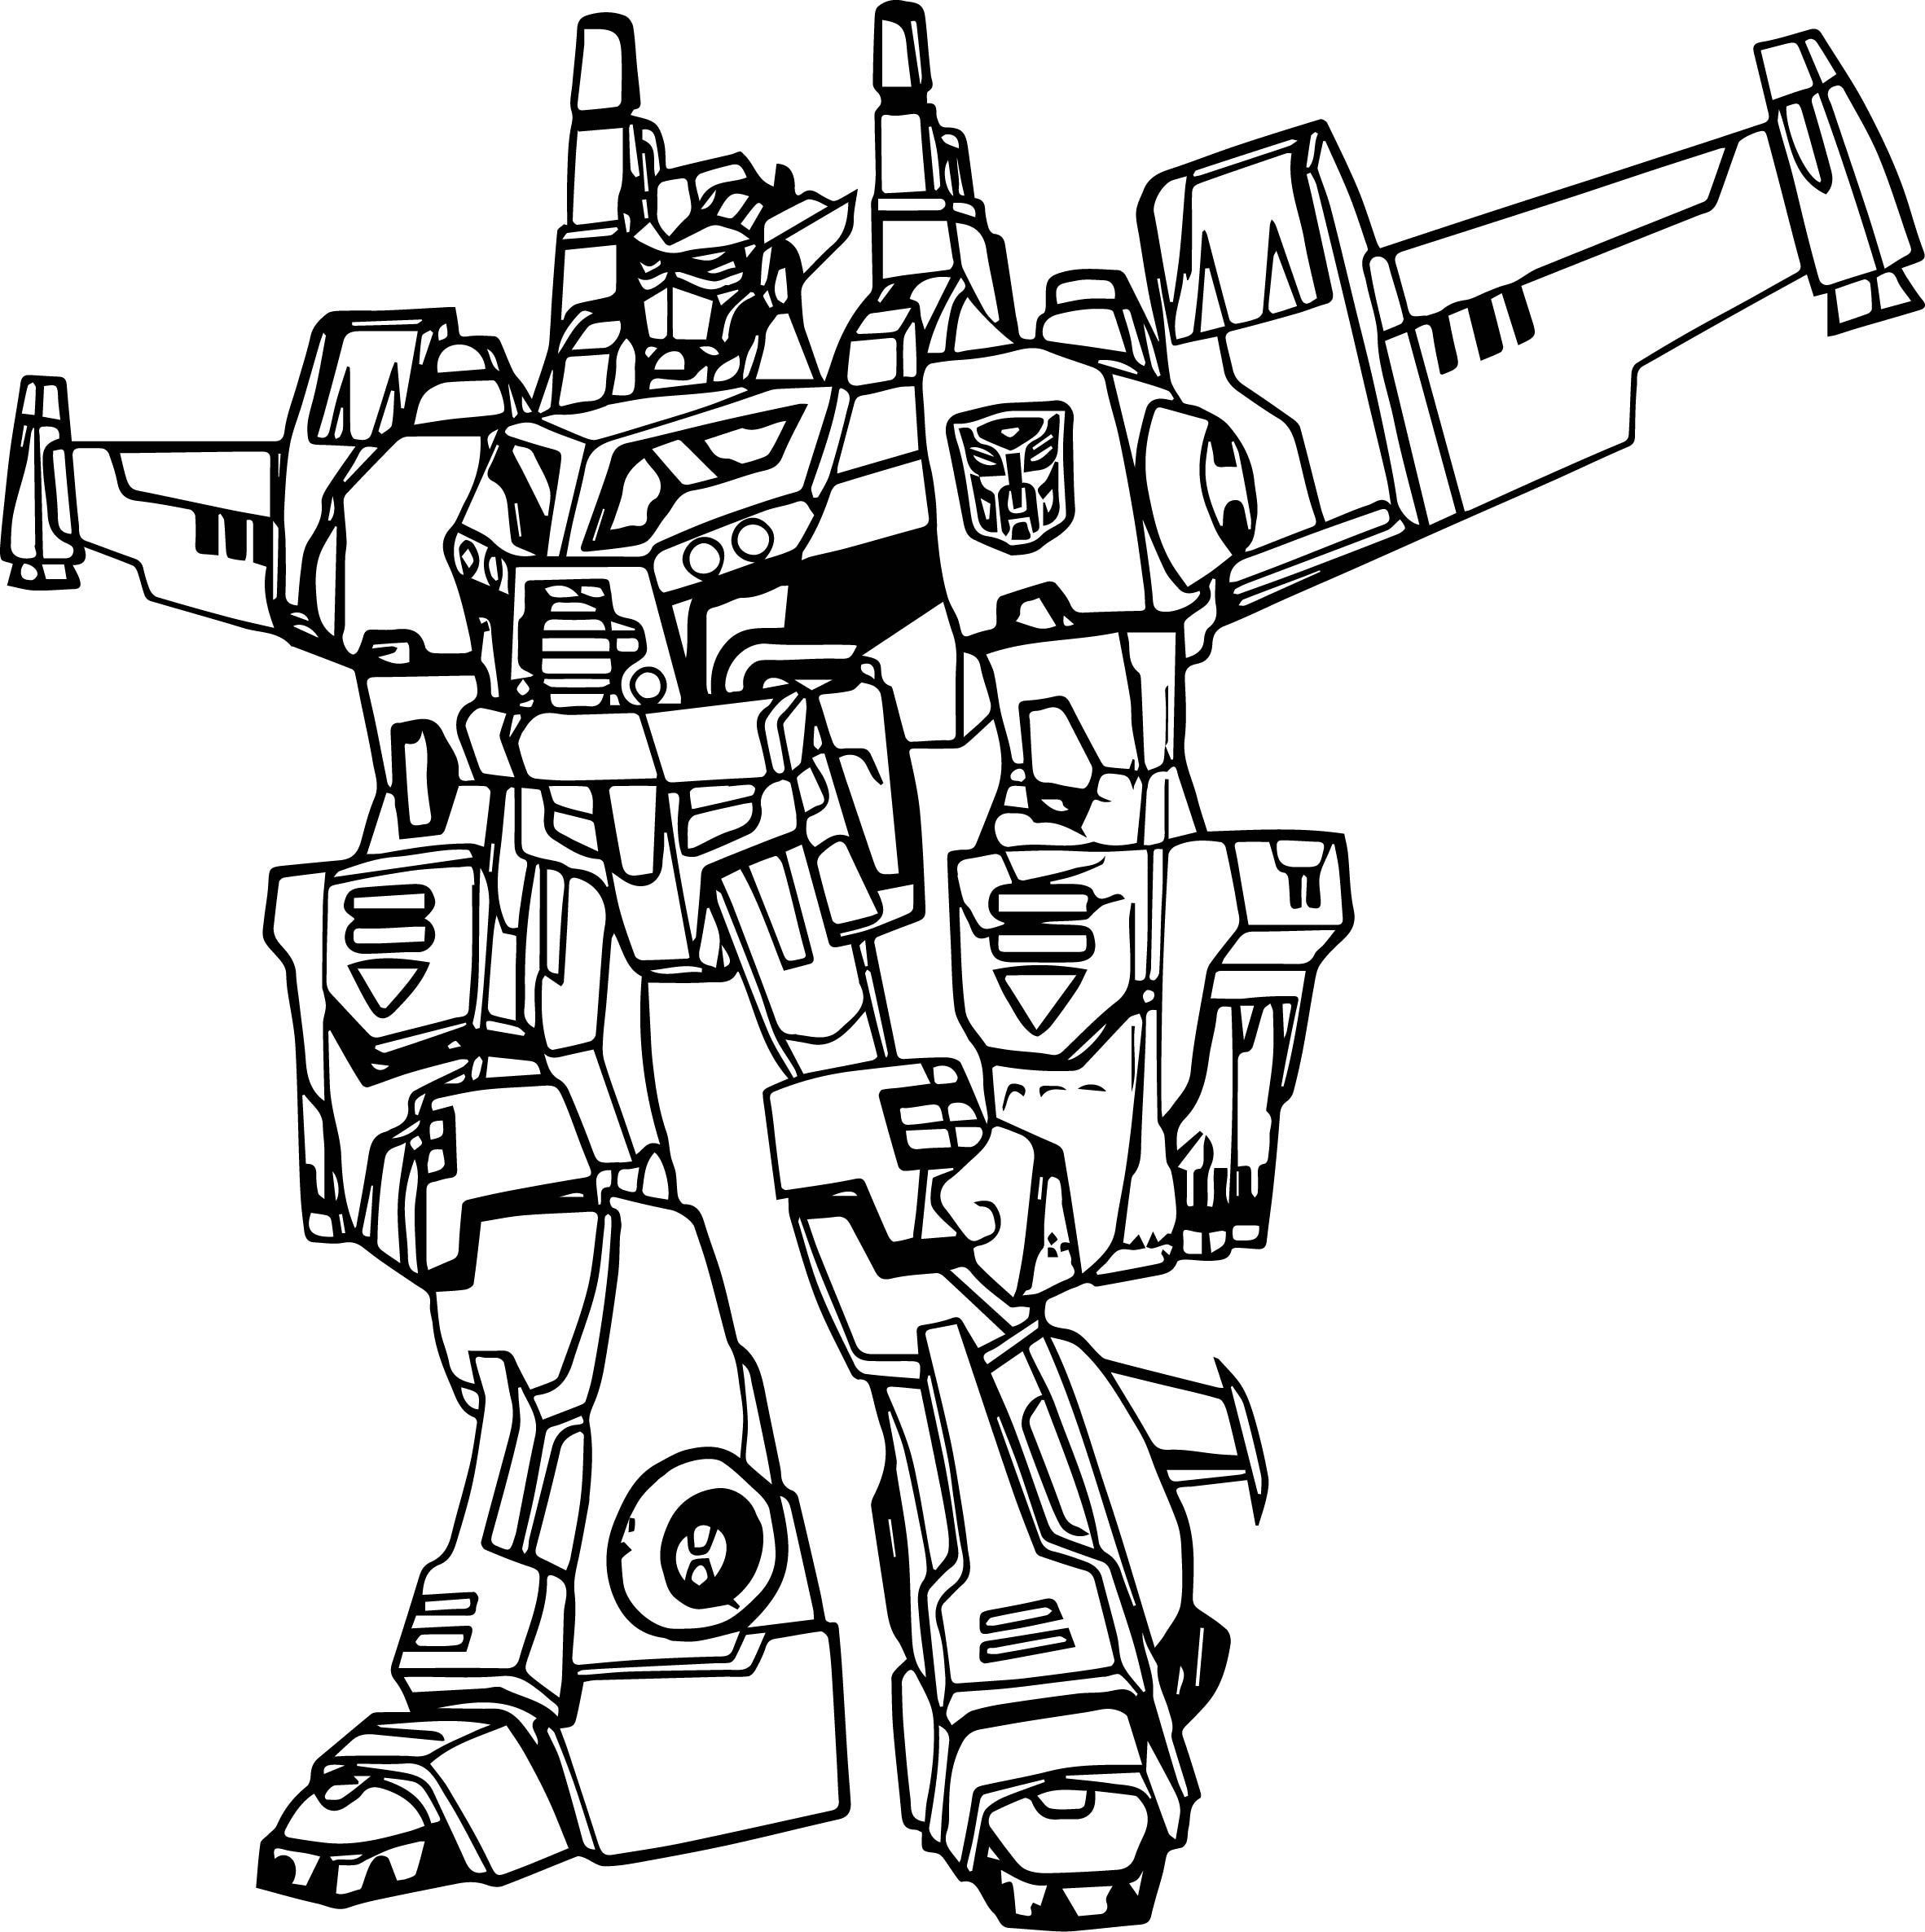 Download Coloring Pages Bumblebee Transformer Coloring Page Rescue Bot Pages Freeus Prime With Angry Birds In For Kids Bumblebee Transformer Coloring Page Off The Wall Atl Coloring Home